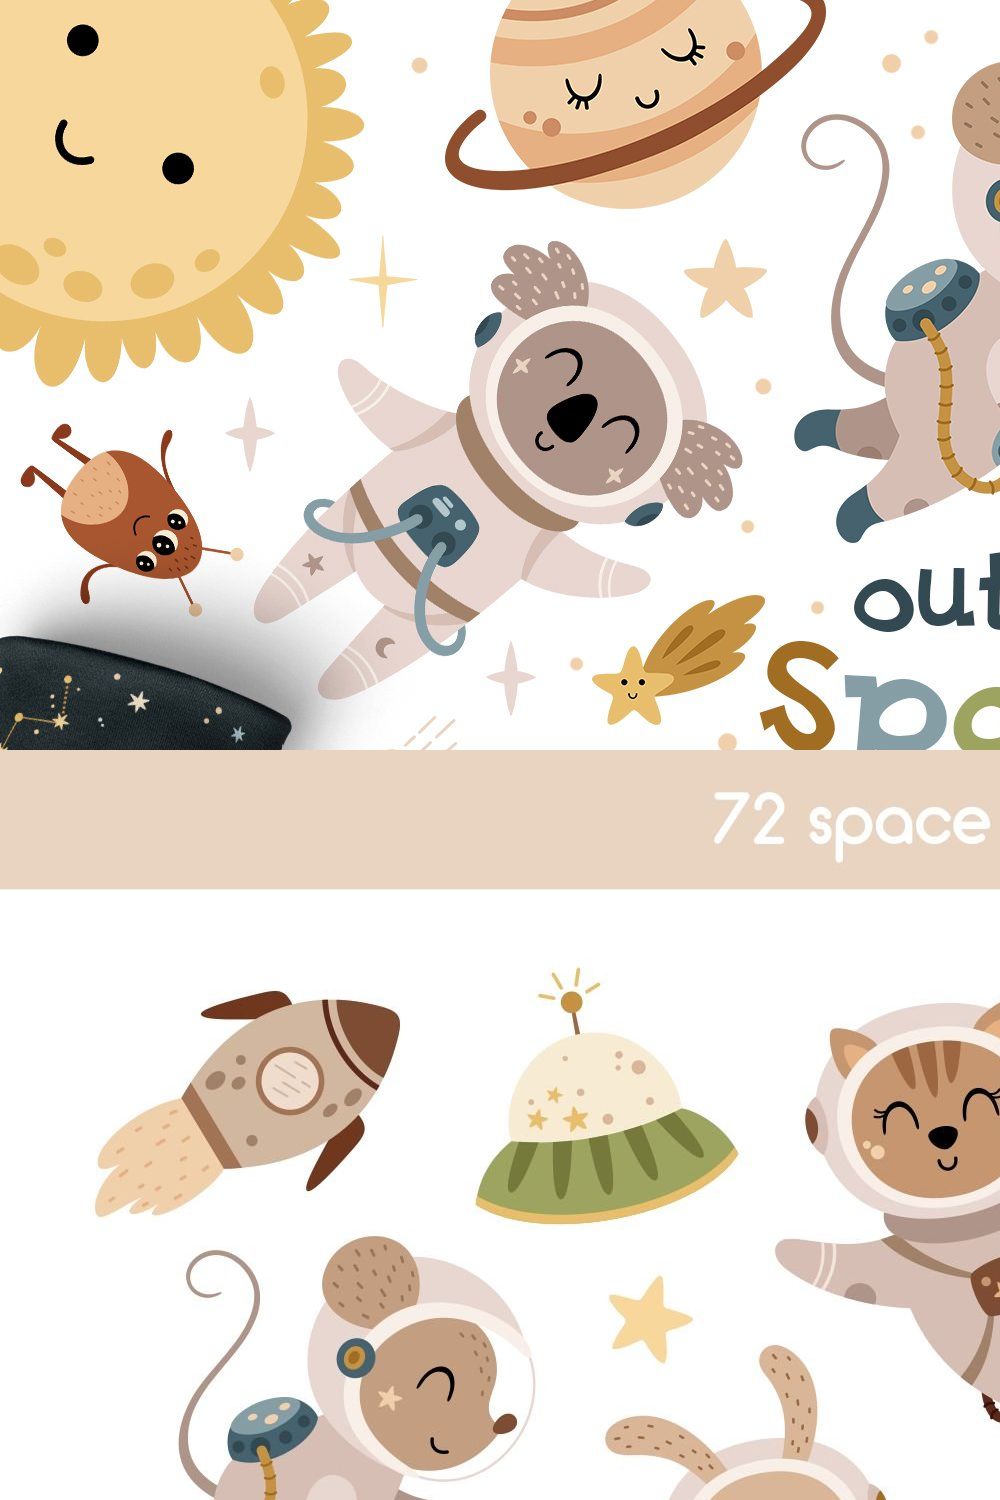 Outer space collection pinterest preview image.